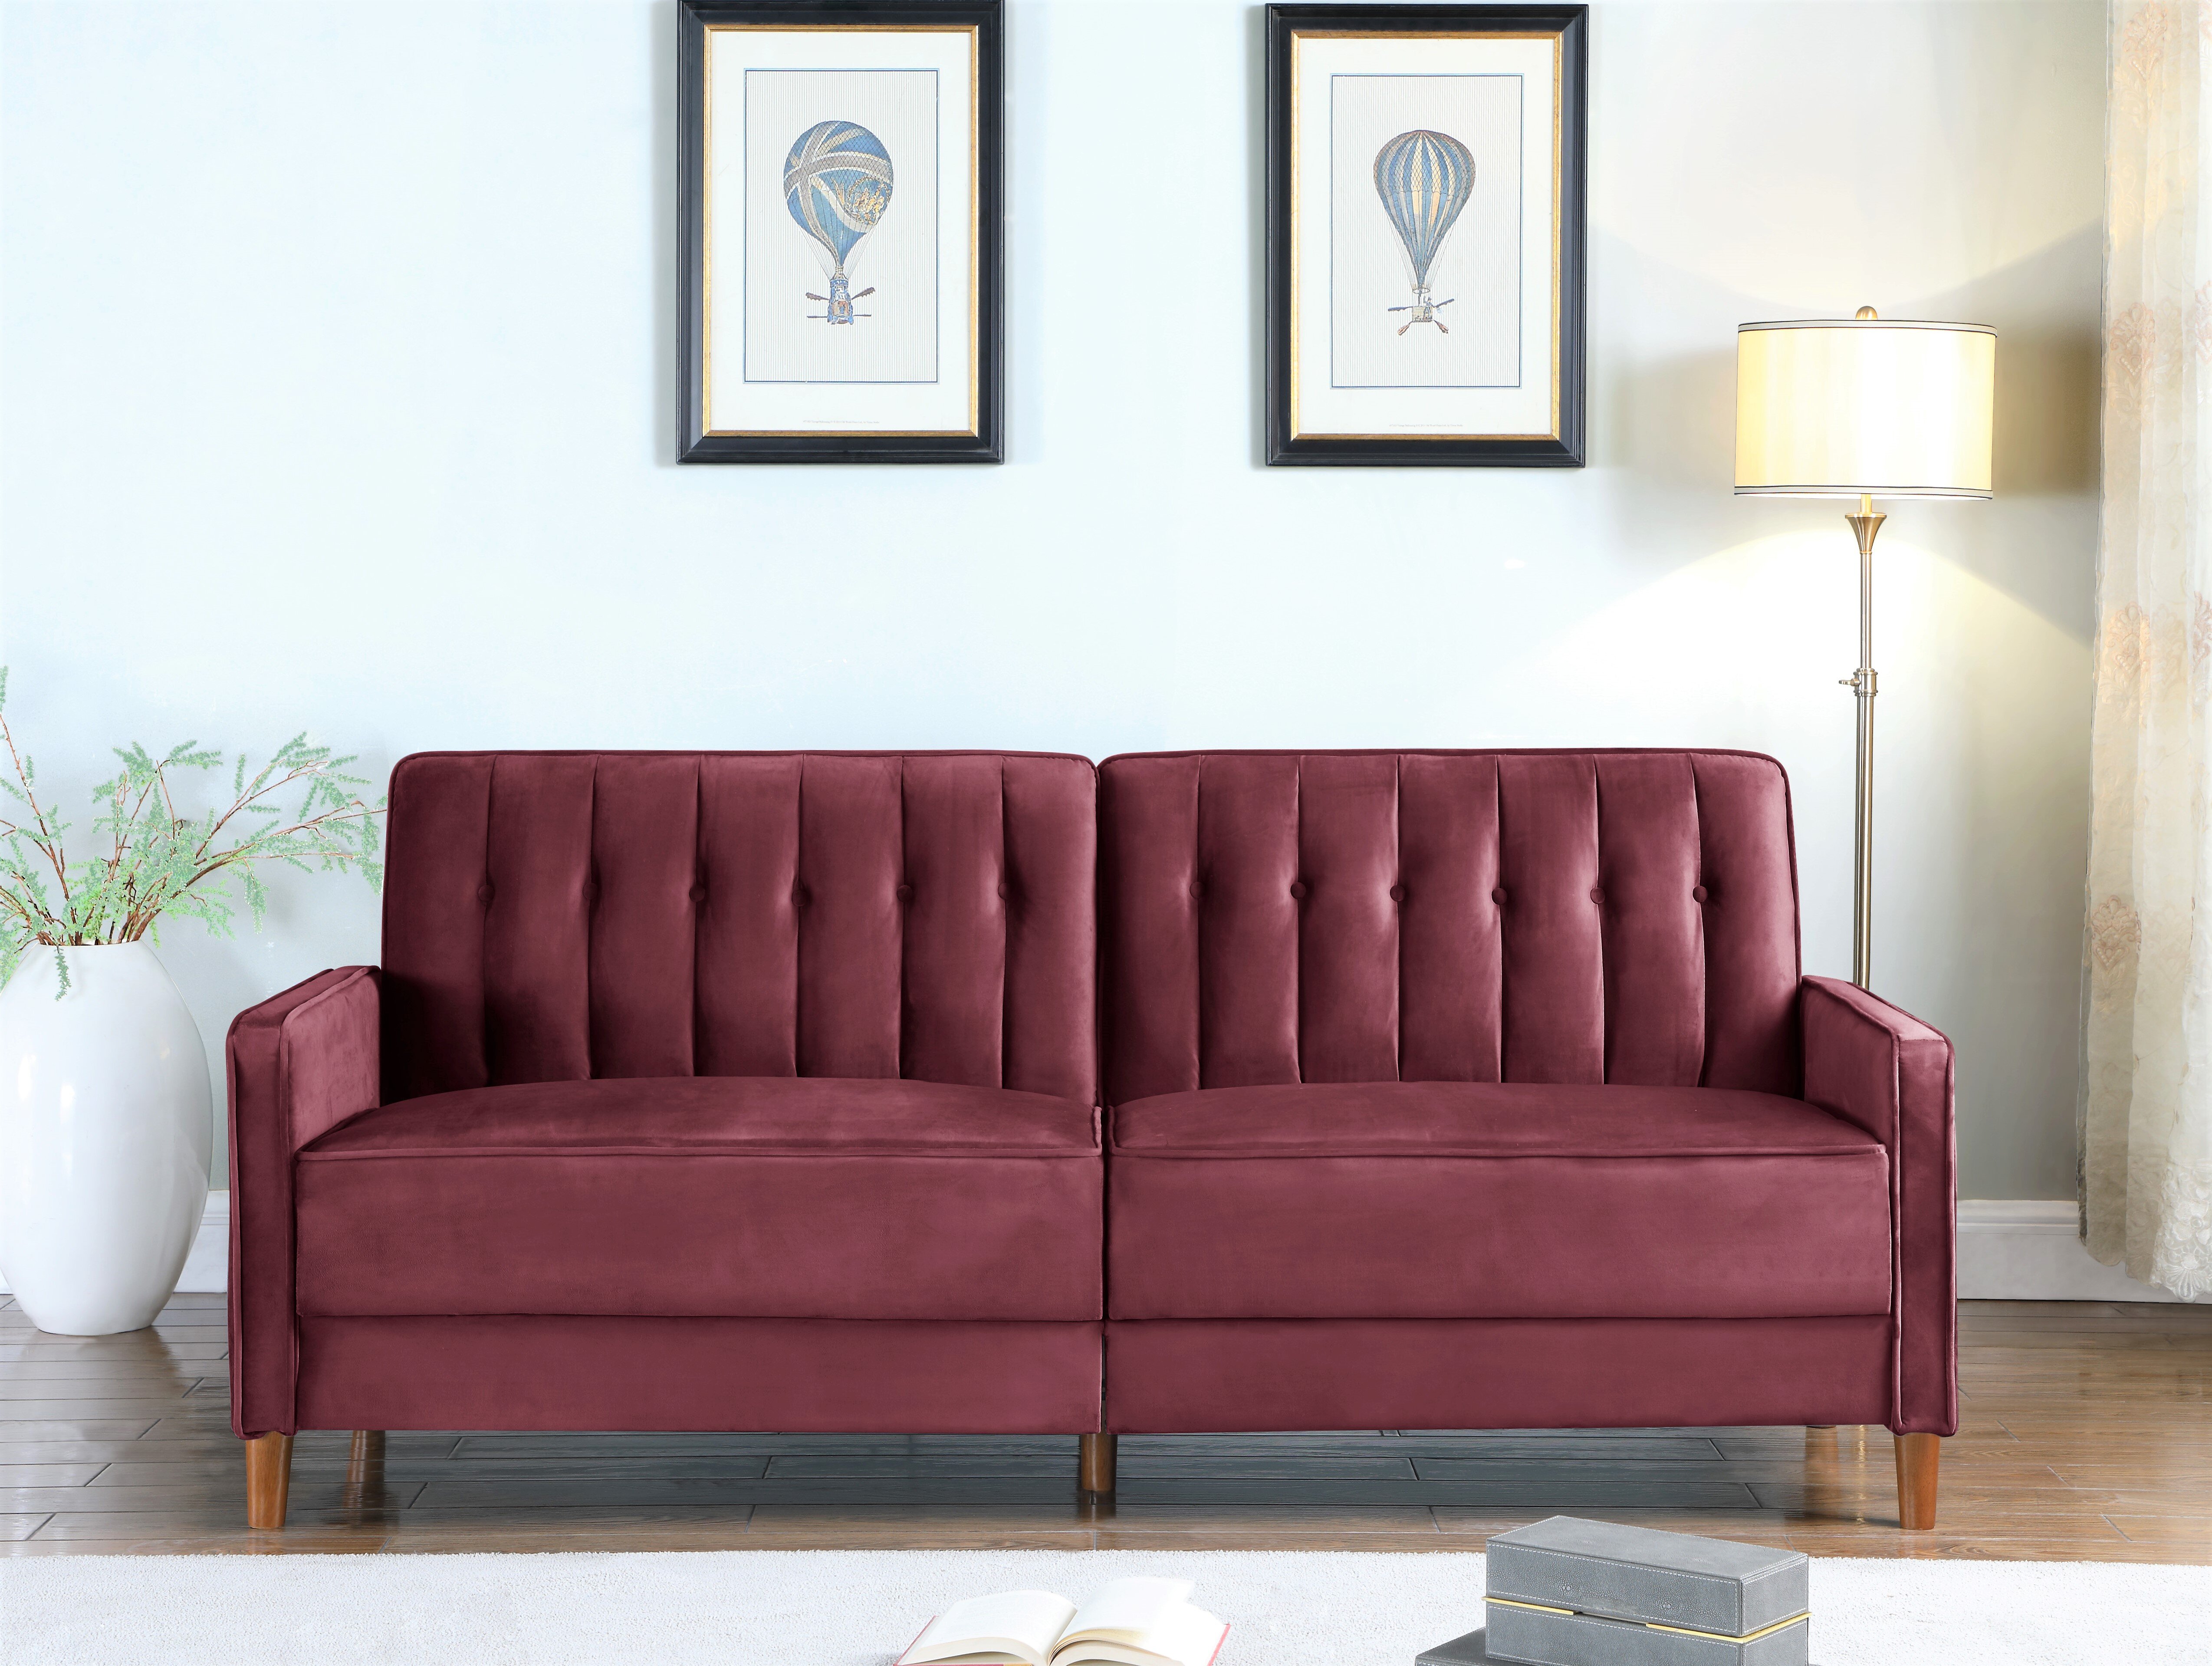 pier 1 red sofa bed